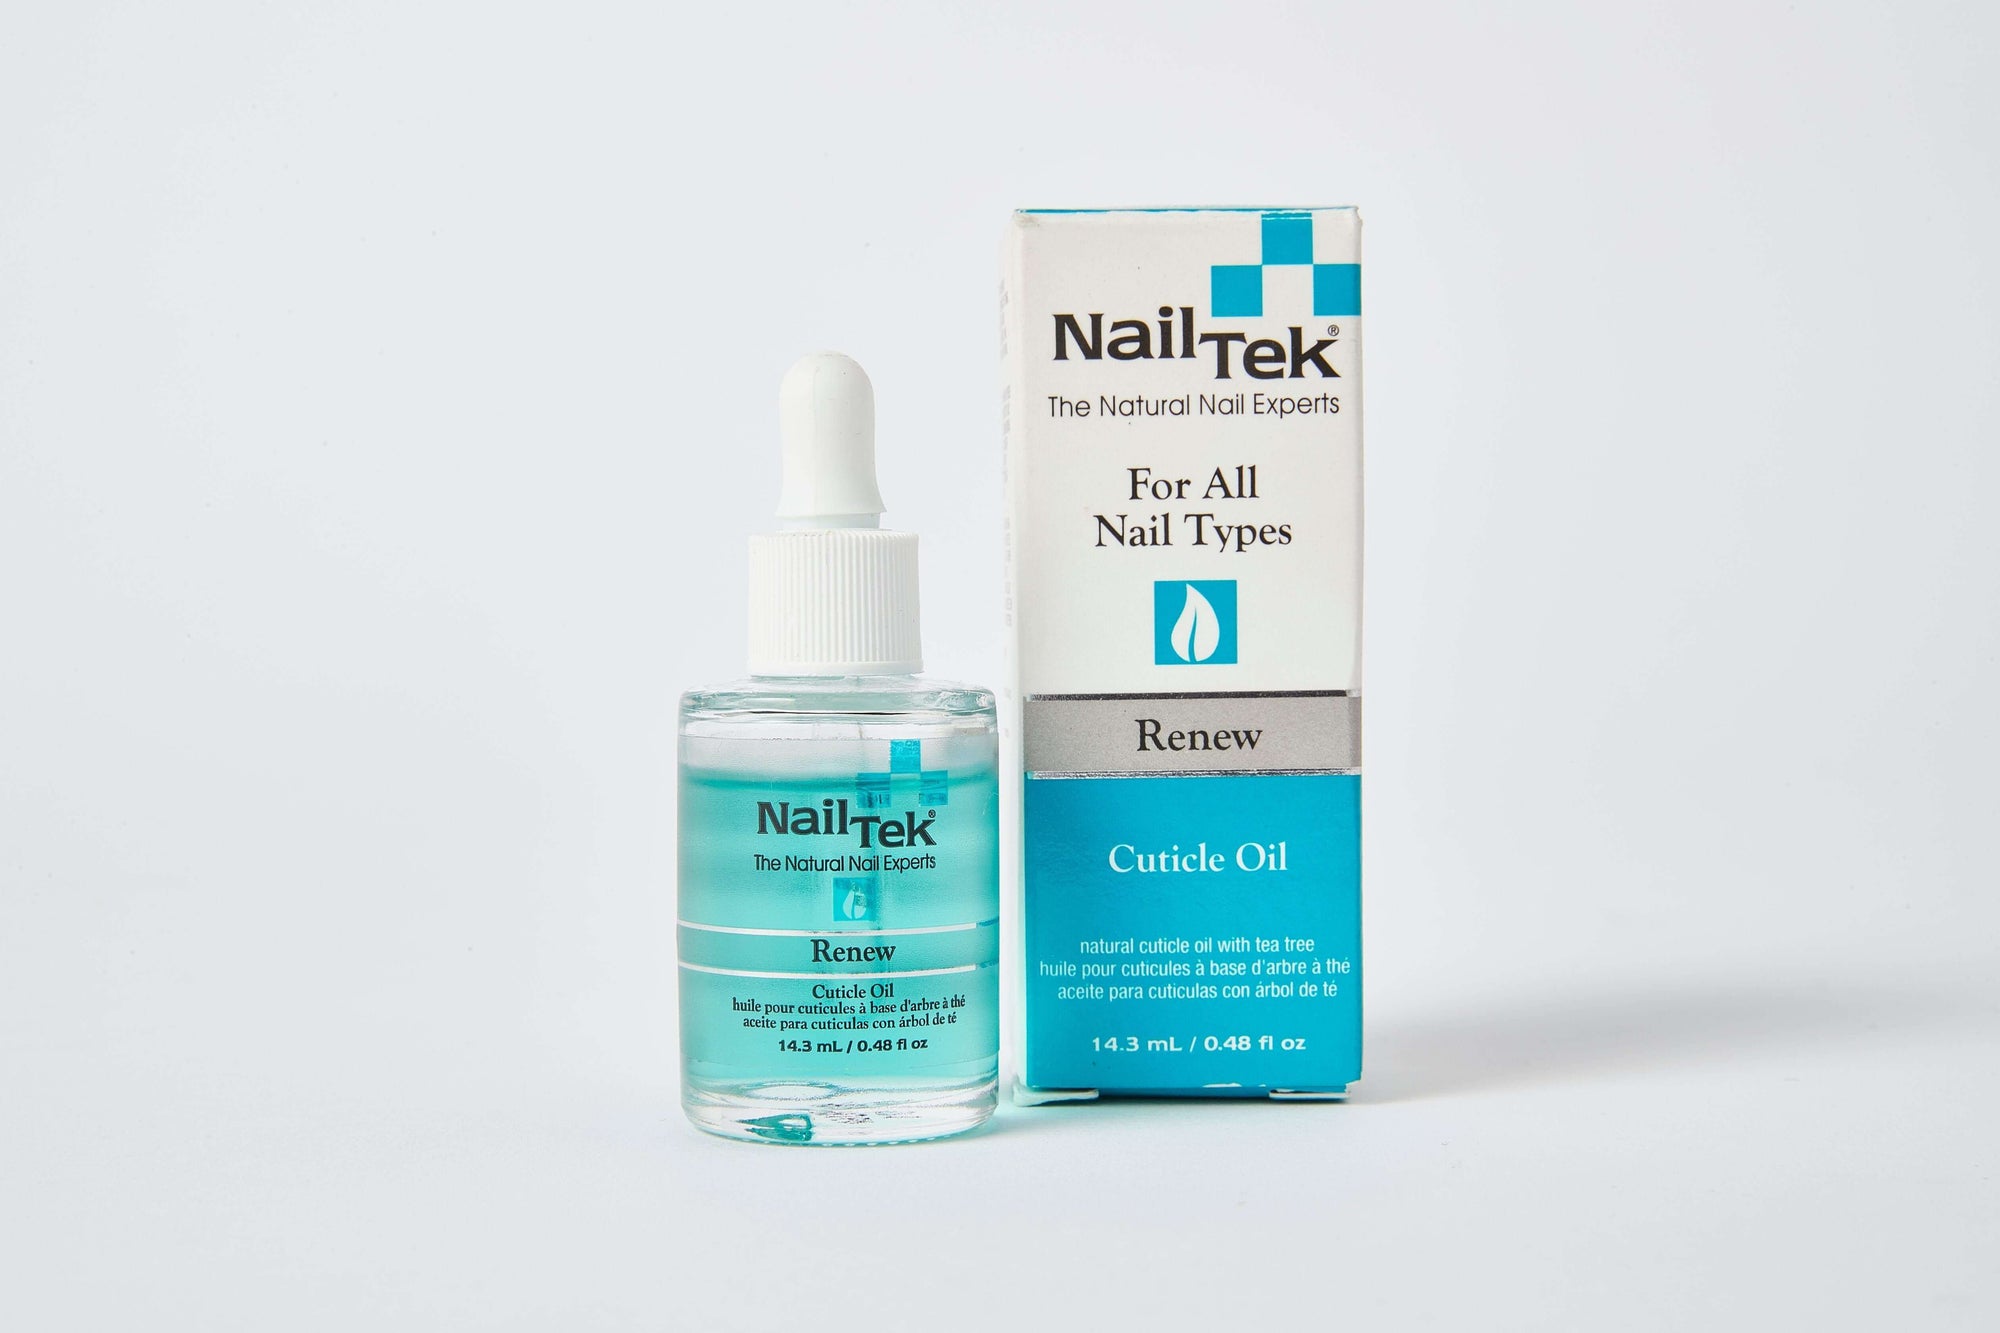 Buy MGEELHOE Finger & Toe Nail Fungus care Gel 15ml Online at Low Prices in  India - Amazon.in